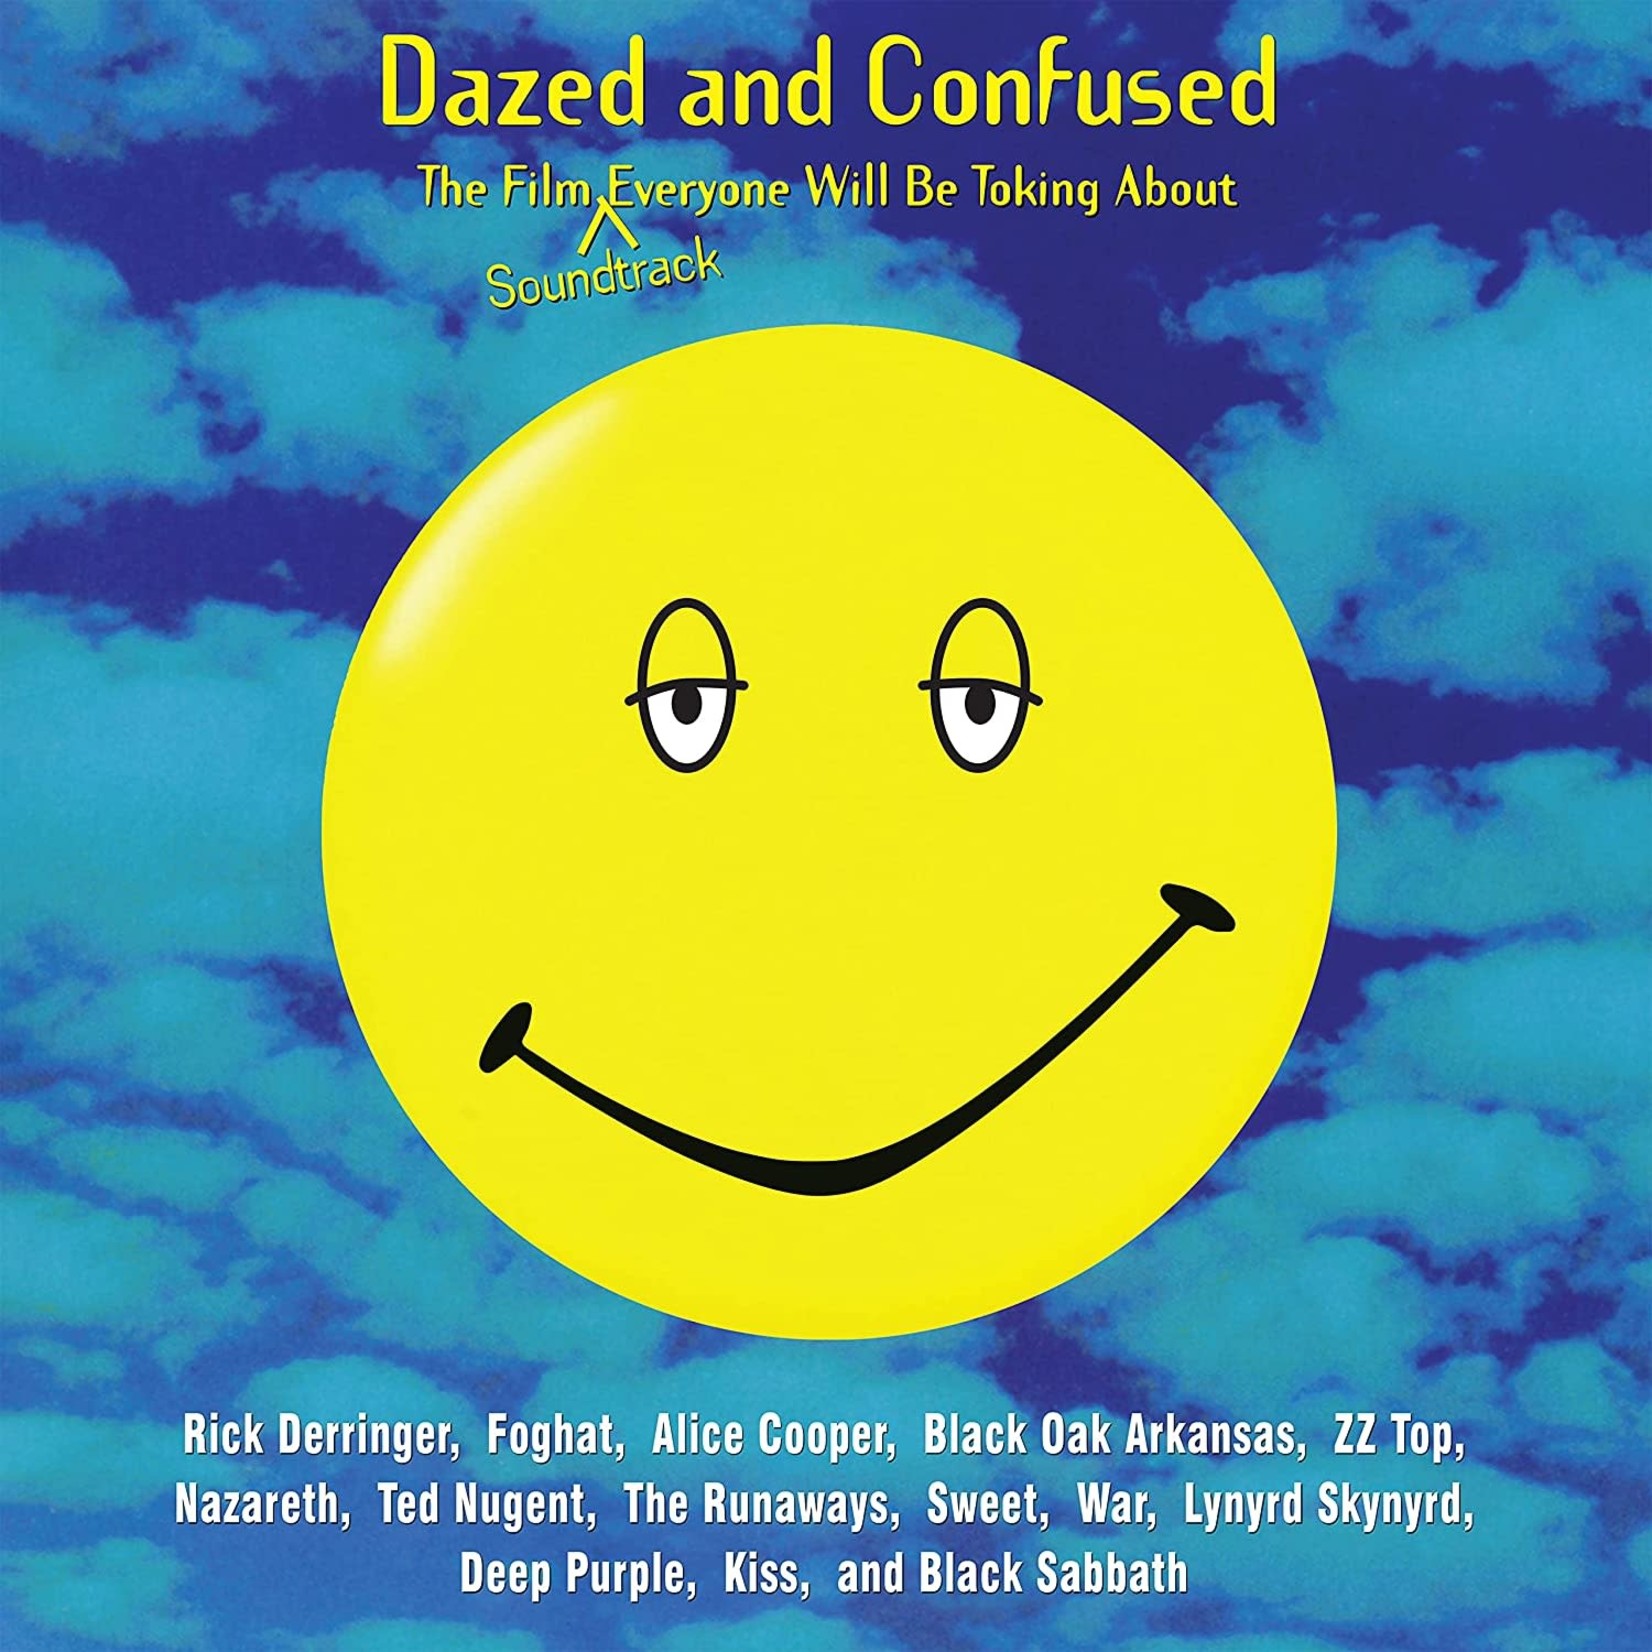 VARIOUS ARTISTS DAZED AND CONFUSED (MUSIC FROM THE MOTION PICTURE) TRANS PURPLE 2 LP